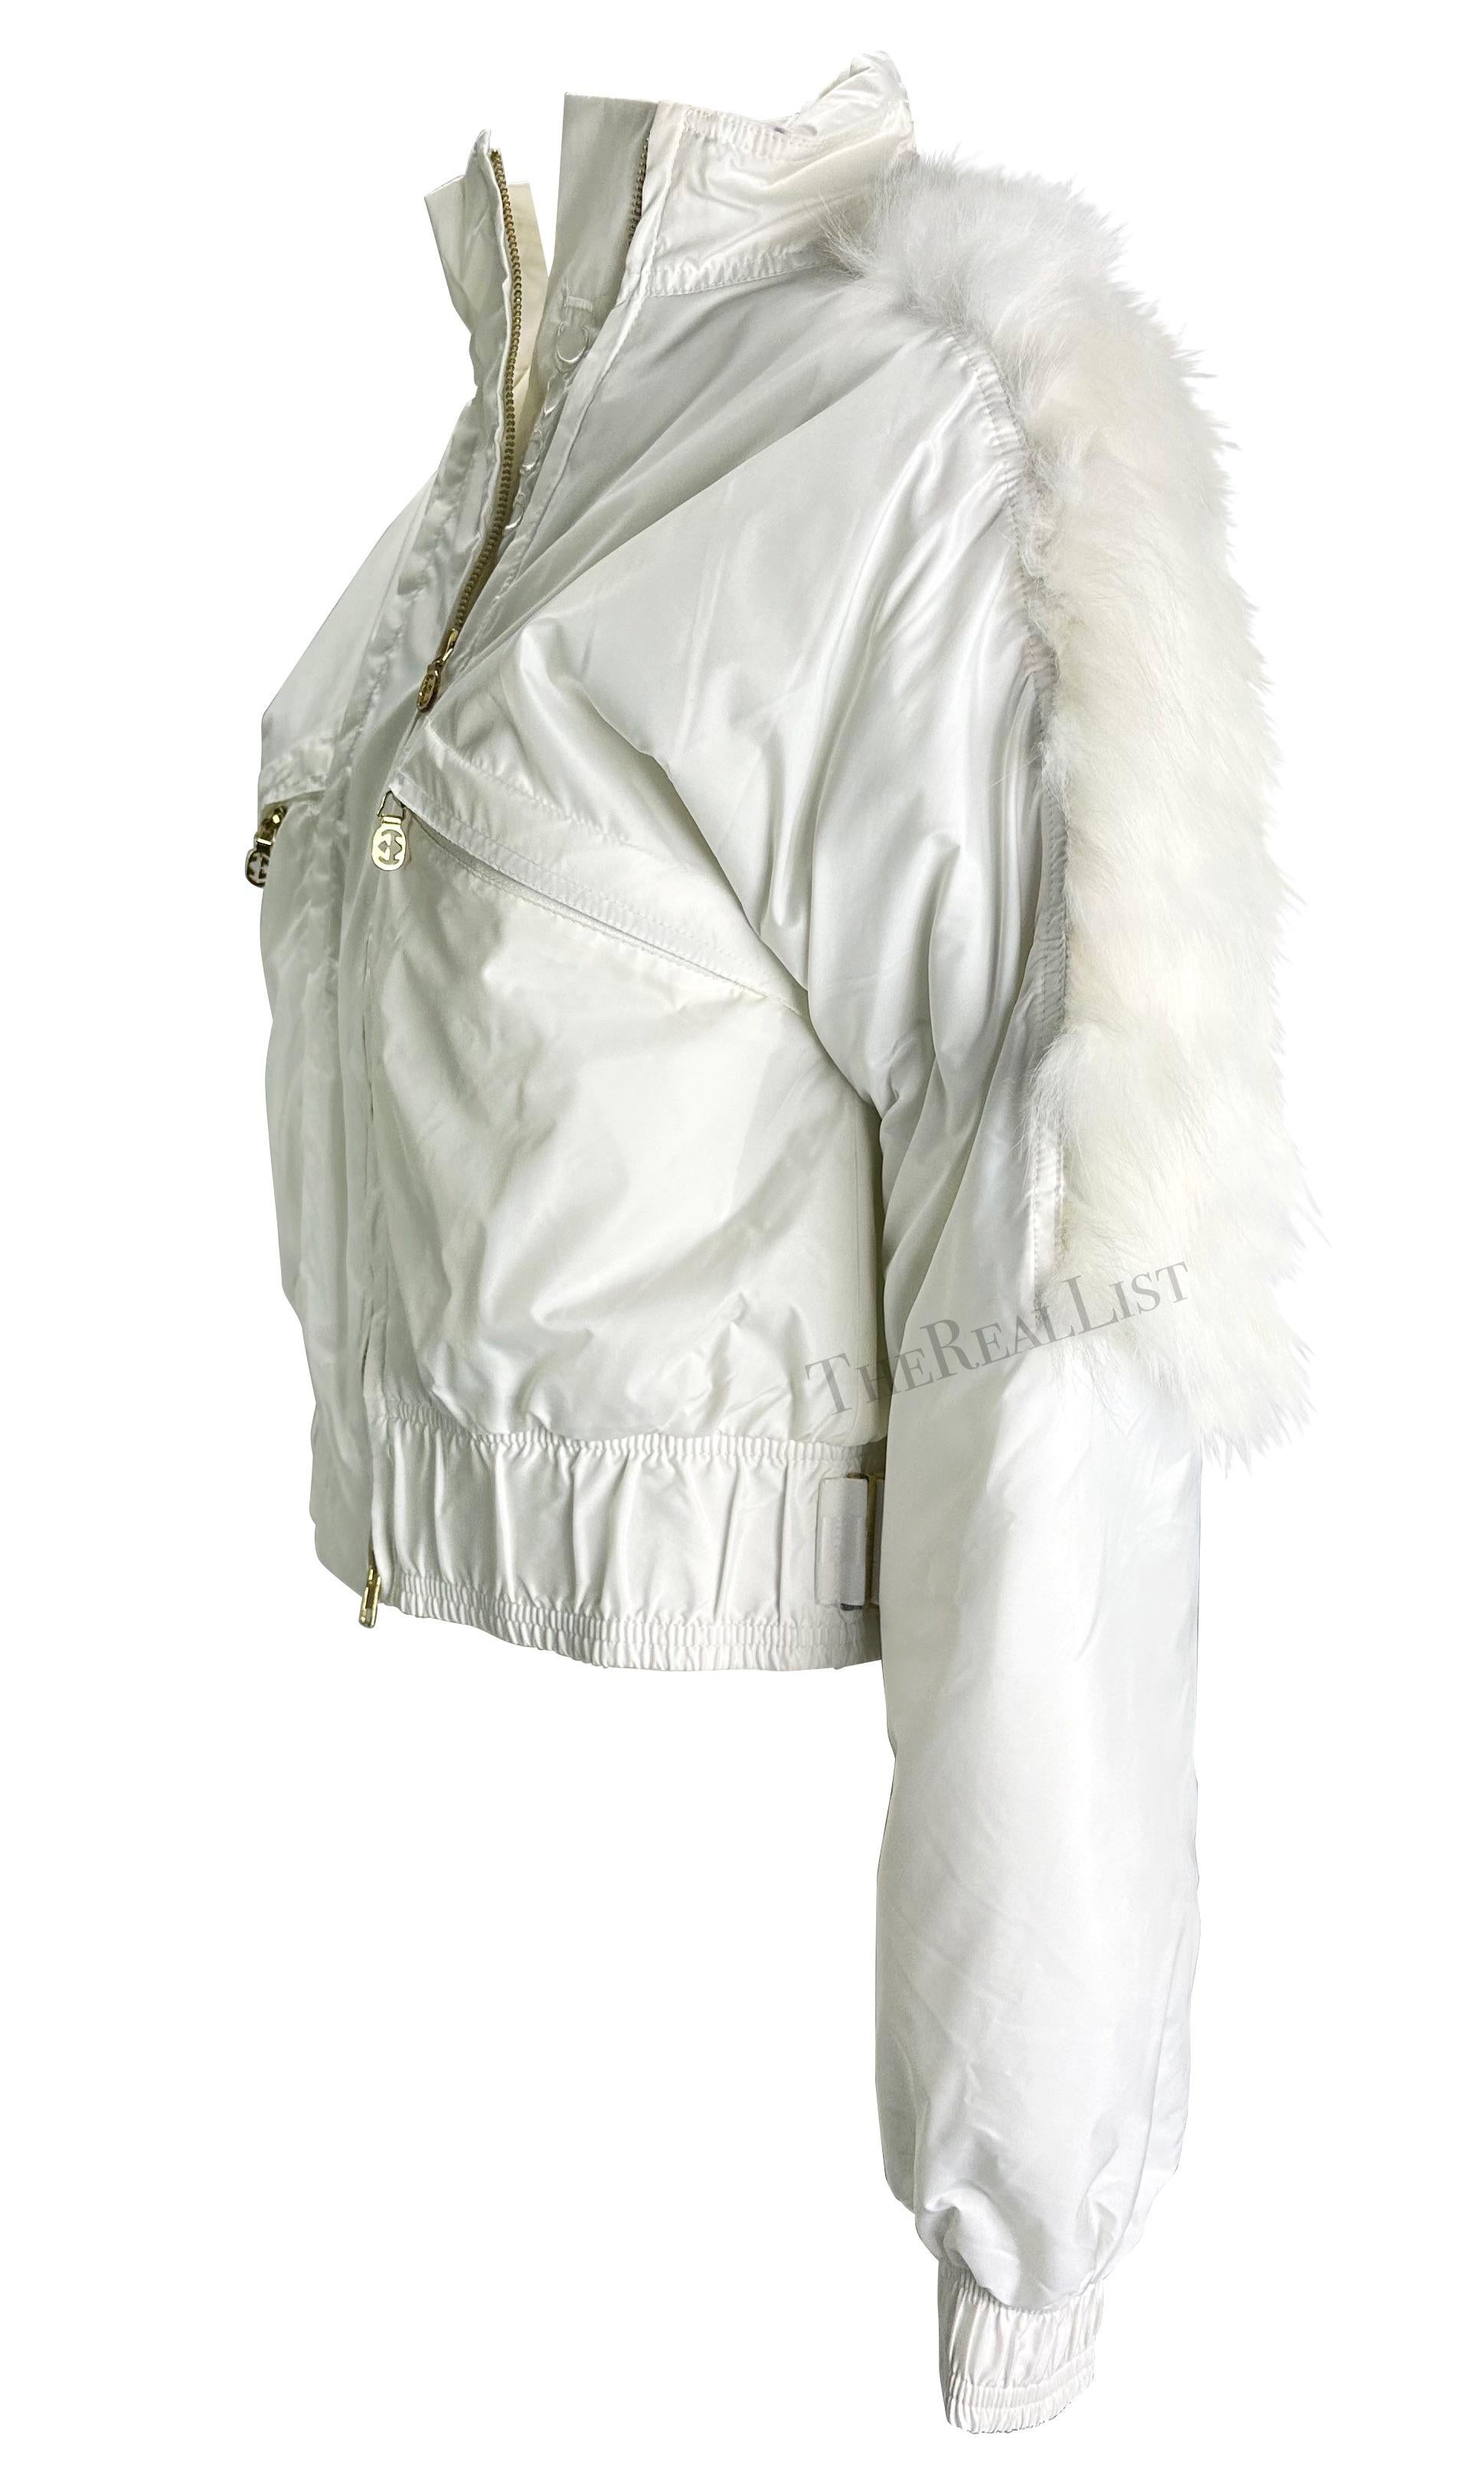 Presenting a beautiful white Gucci puffer jacket, designed by Tom Ford. From the Fall/Winter 2004 collection, this winter jacket features a fur trim, embroidered Gucci logo, gold-tone GG hardware, and a hidden hood. A rare piece from Ford’s last